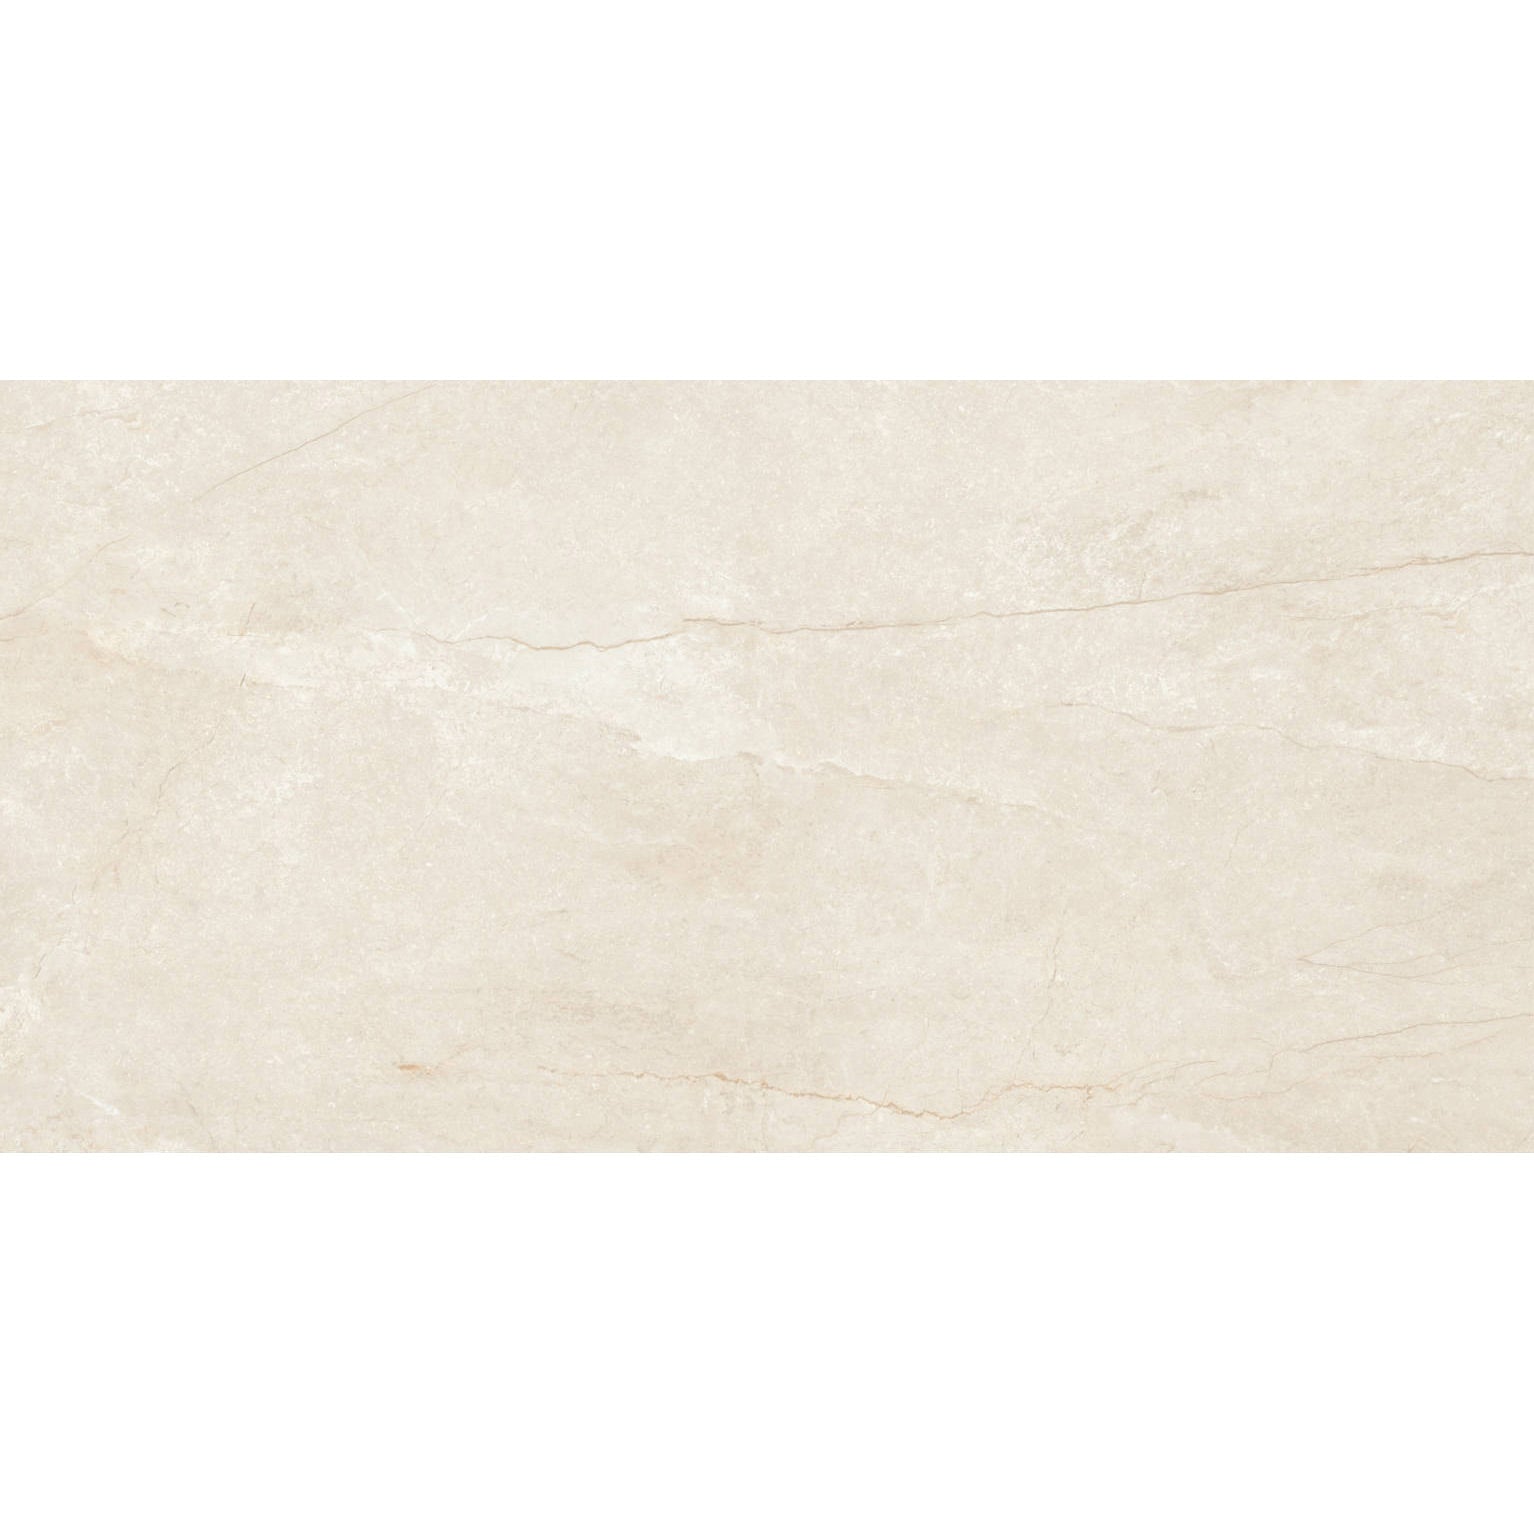 General Ceramic - Wells 12 in. x 24 in. Rectified Porcelain Tile - Ivory Matte